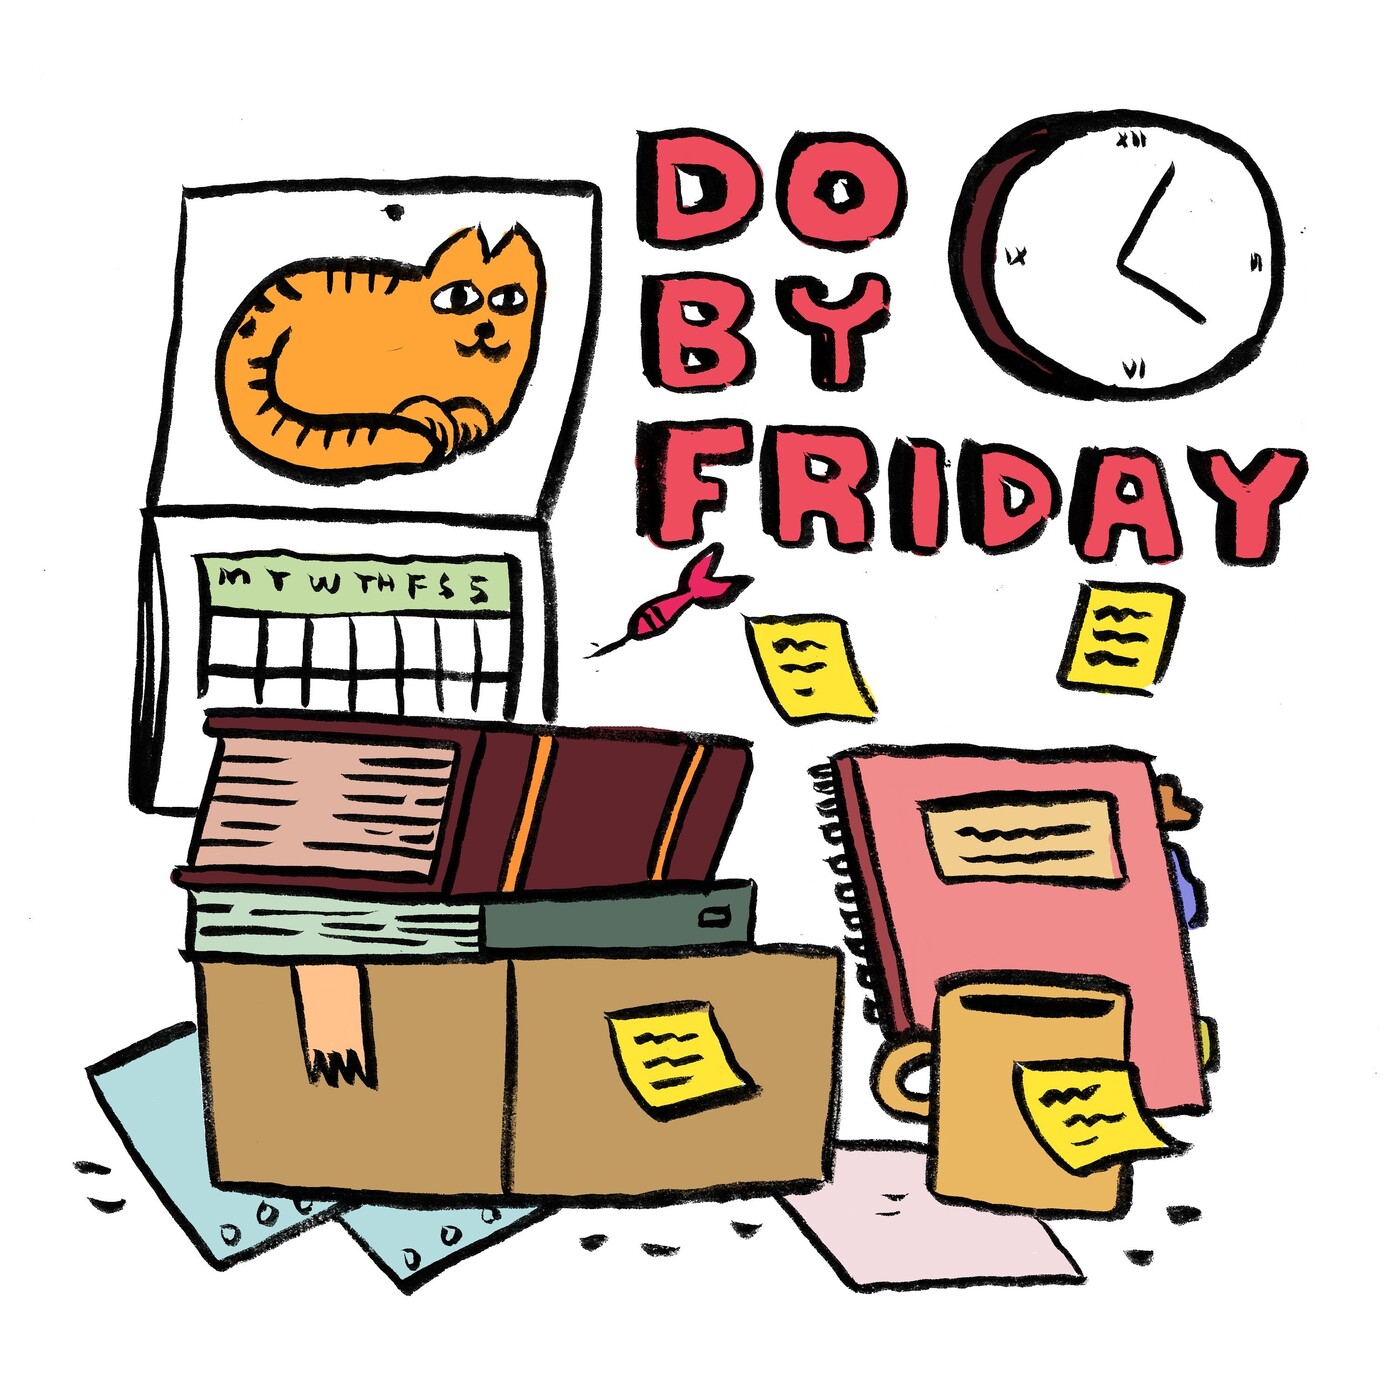 Do By Friday art